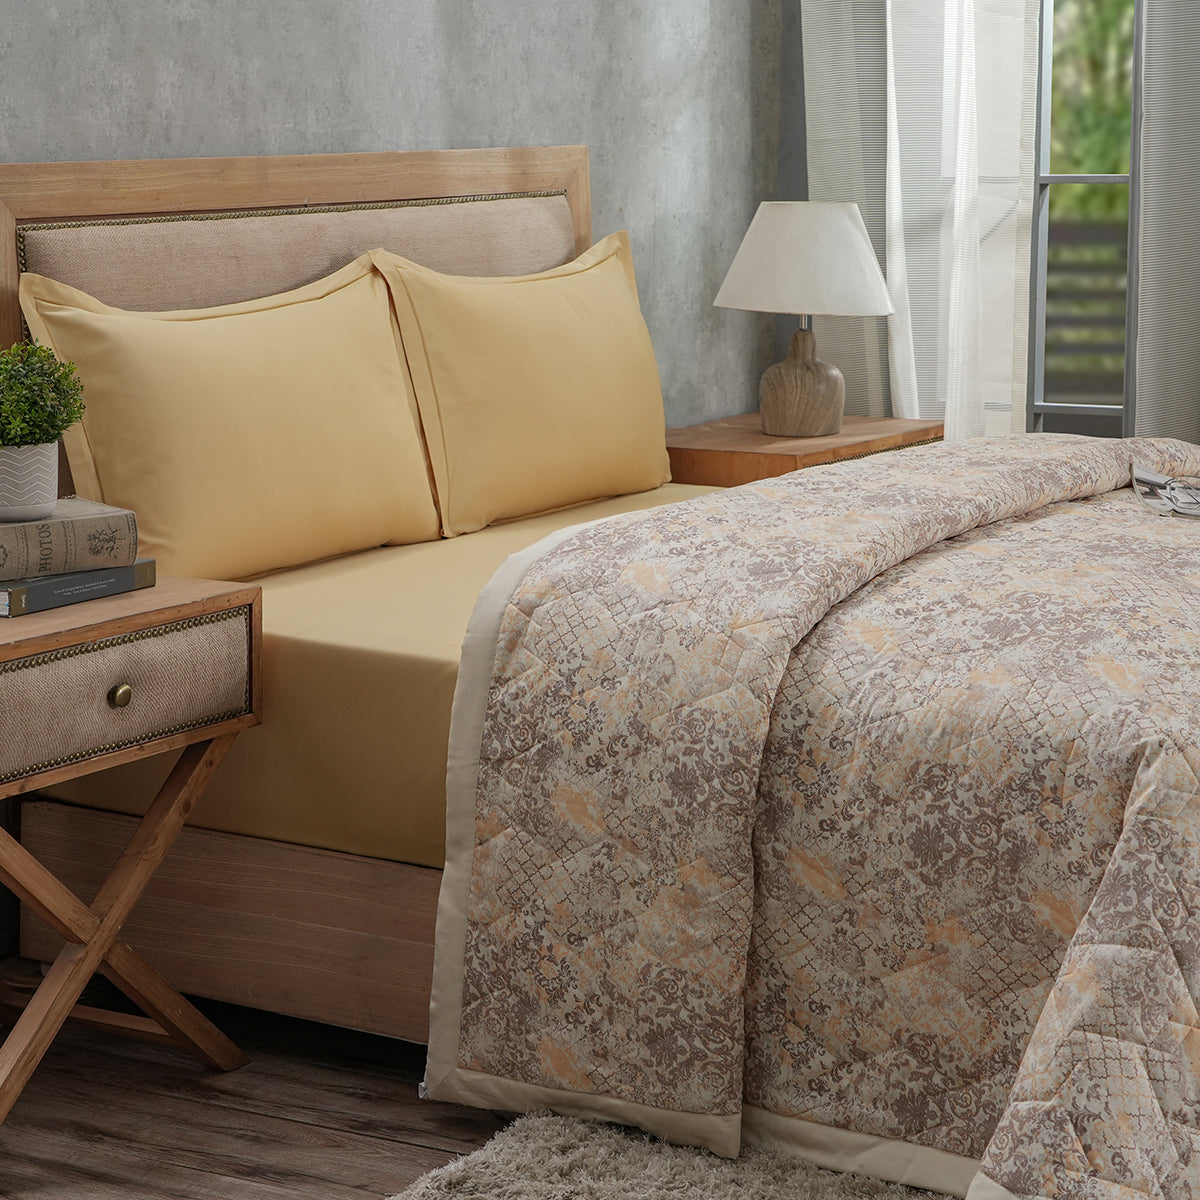 PBS Refined Retro Nouvel Damask Neutral Summer AC Quilt/Quilted Bed Cover/Comferter